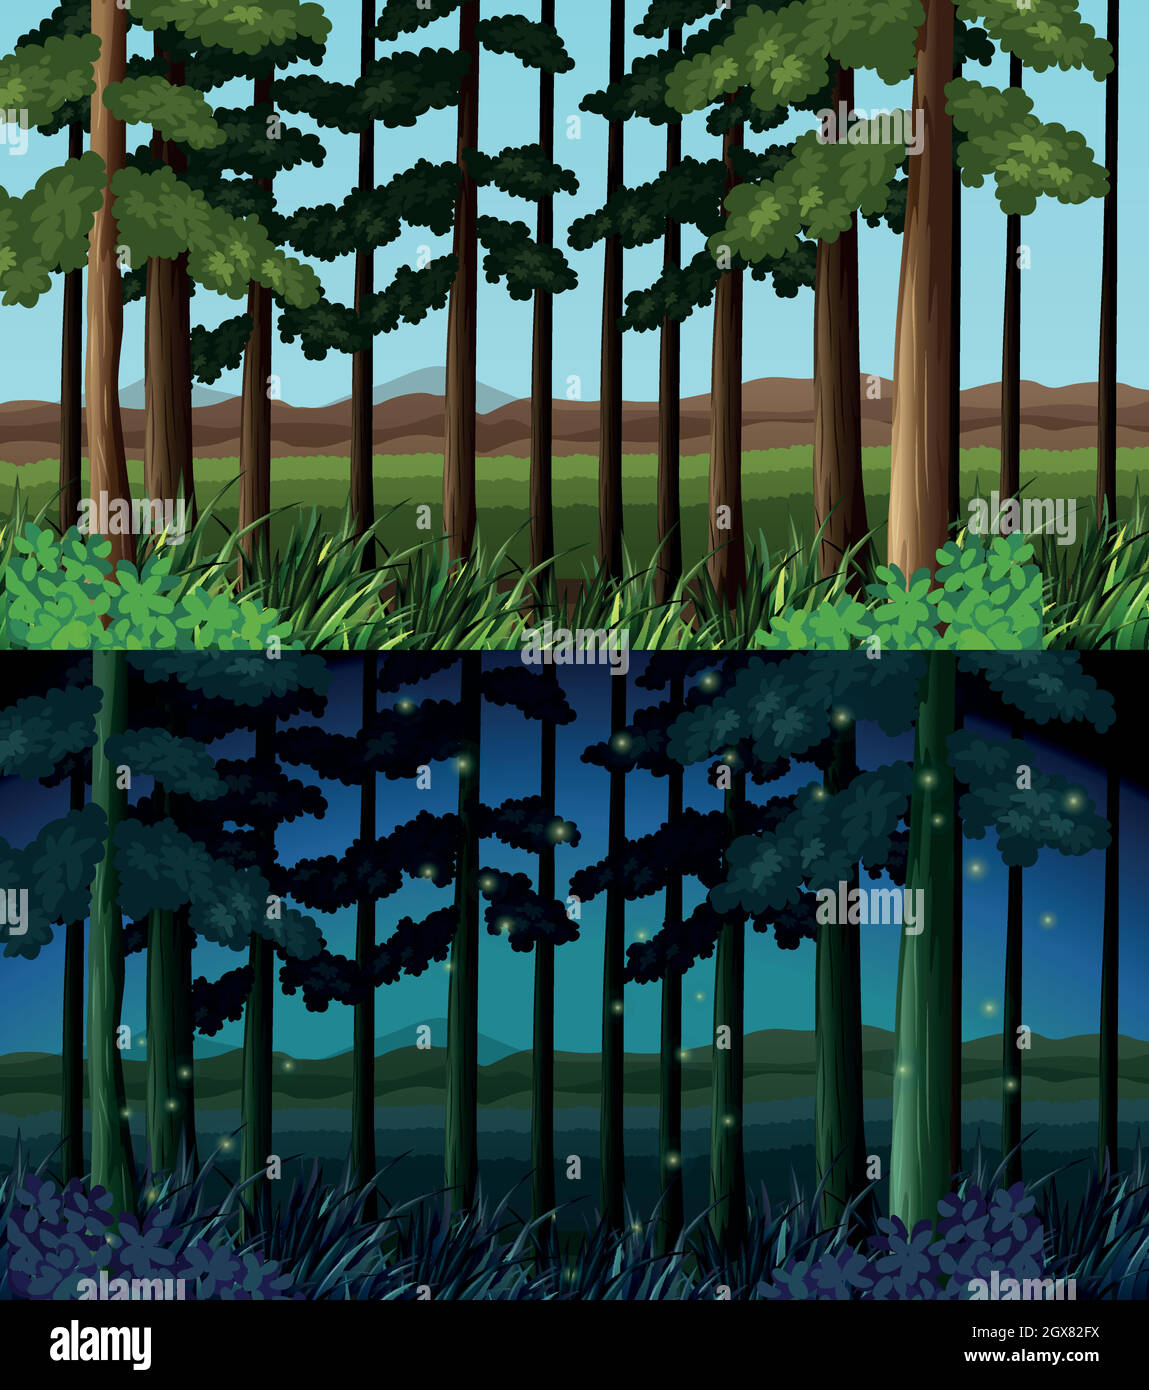 Forest scene at day time and night time Stock Vector